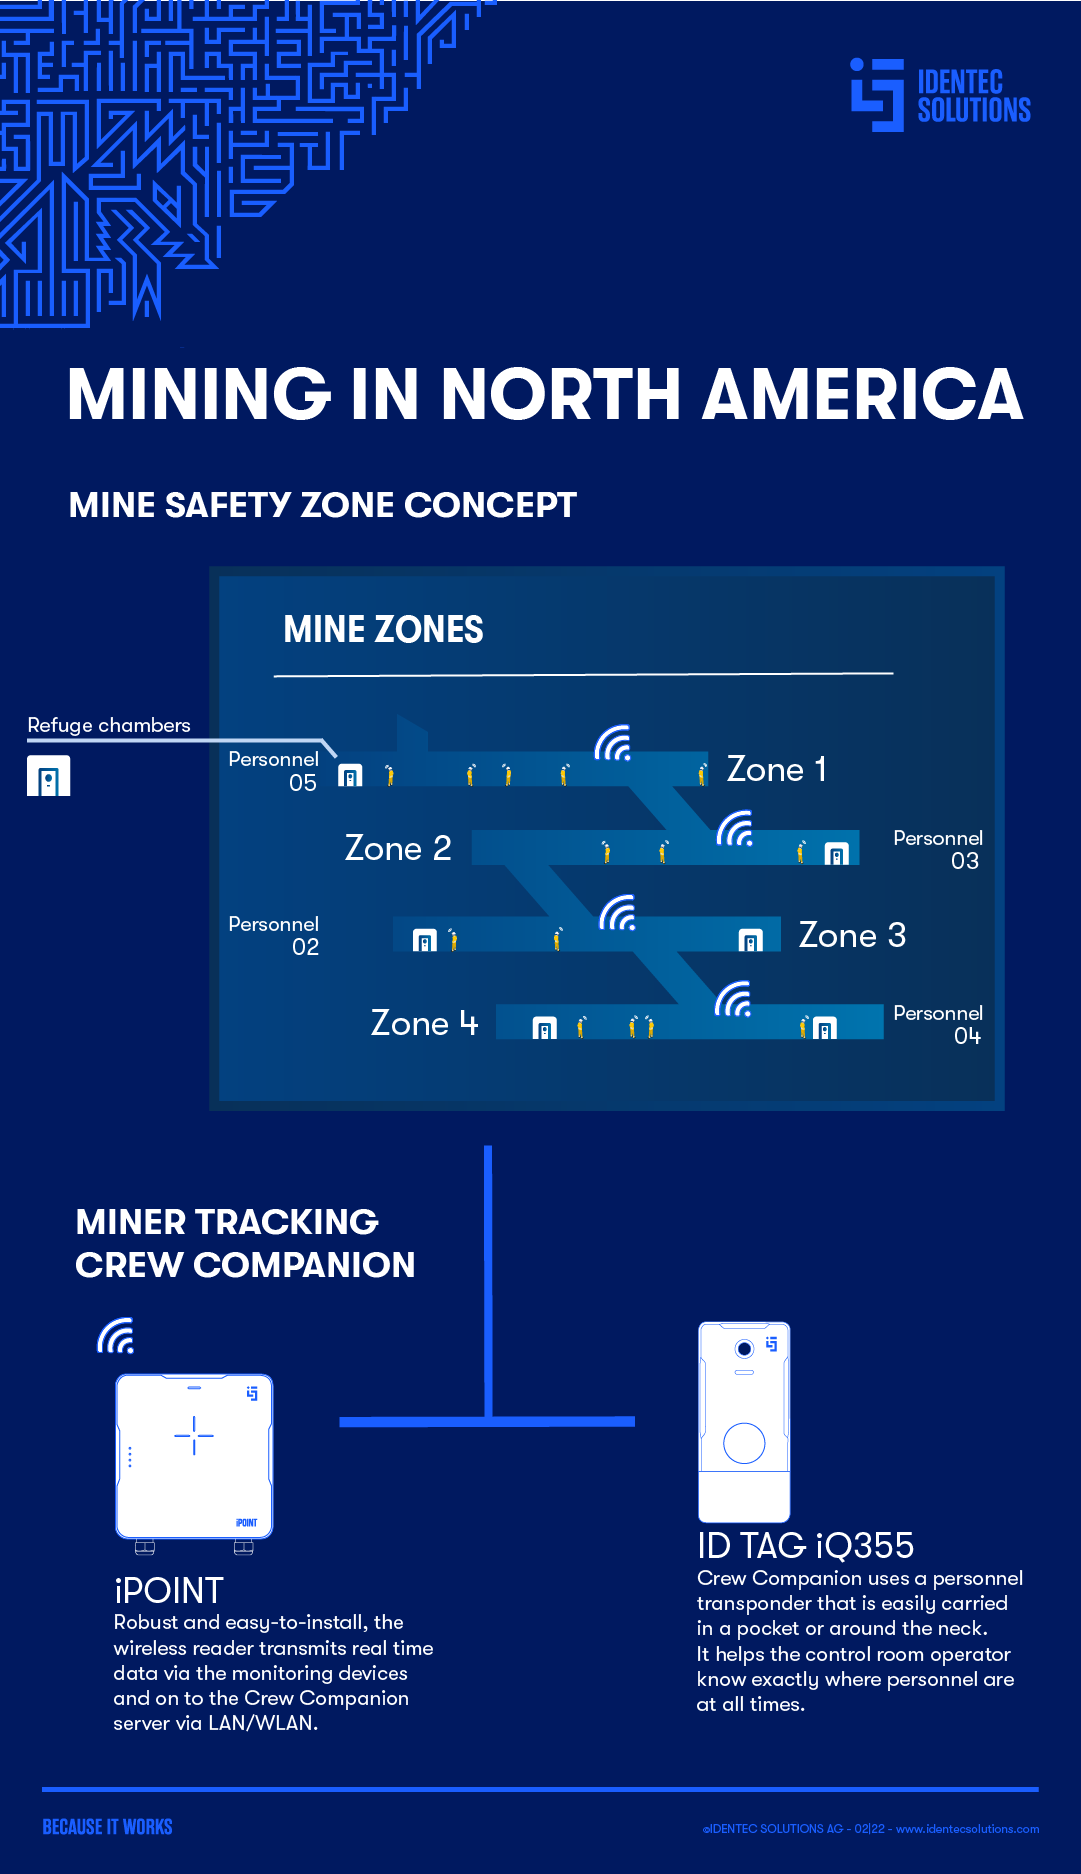 mining-north-america-safety-zone-concept